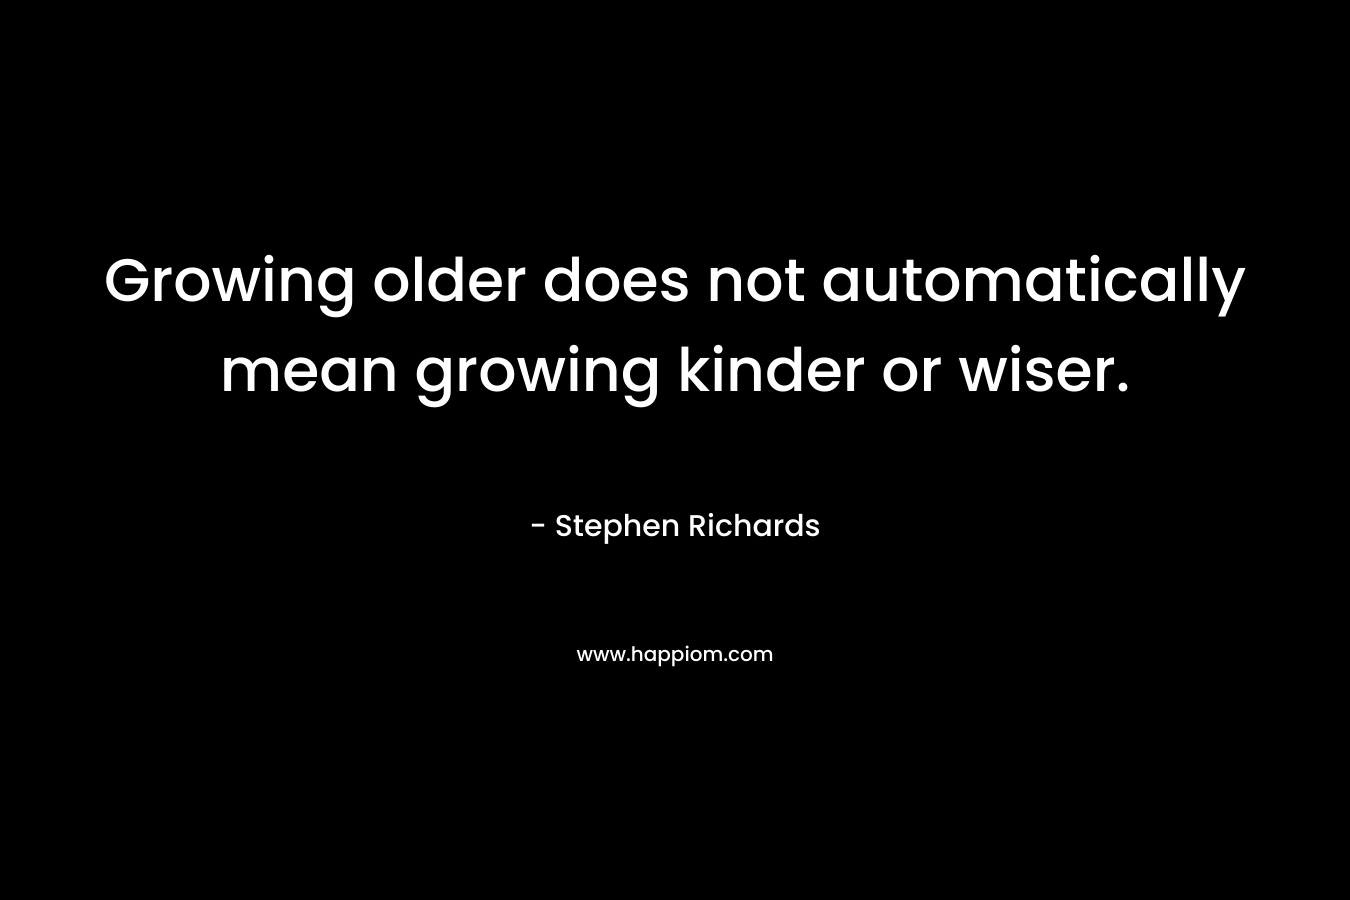 Growing older does not automatically mean growing kinder or wiser.